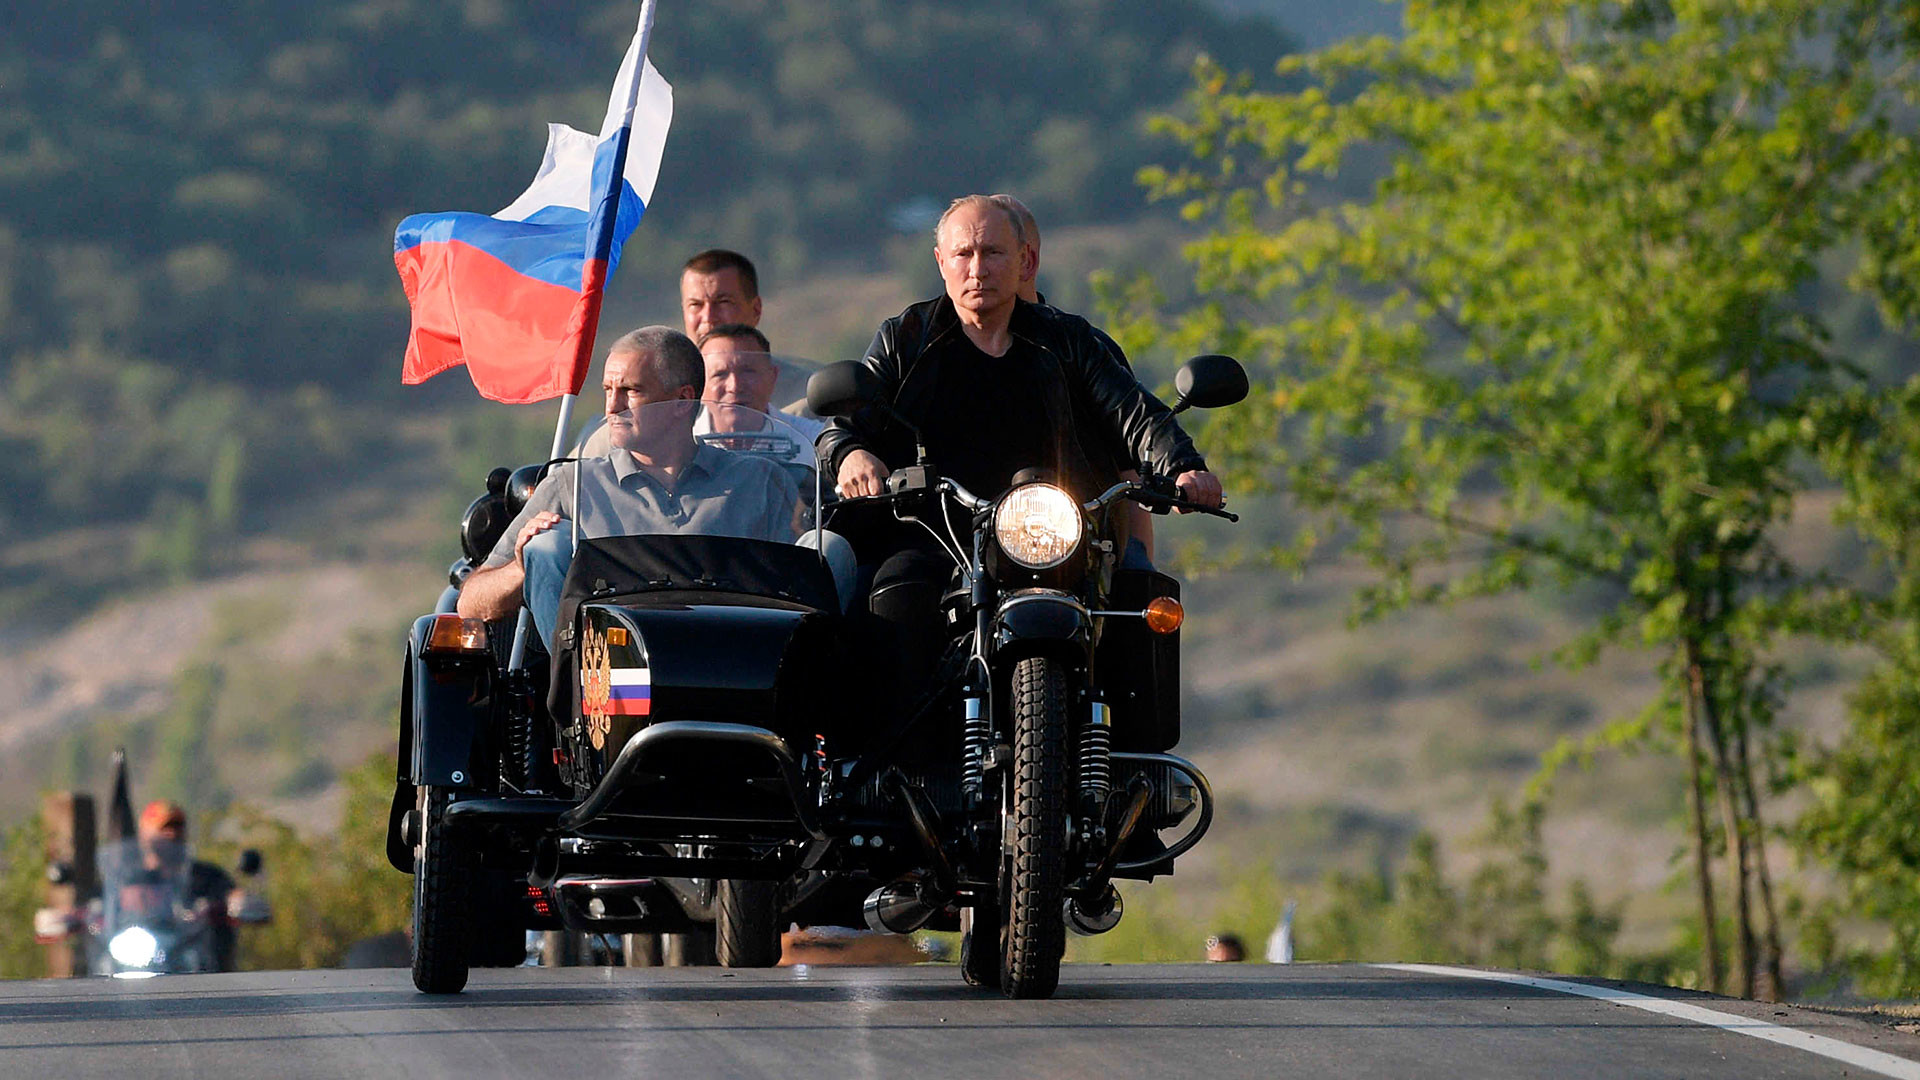 August 10, 2019. Russian President Vladimir Putin participates in the international bike show in Sevastopol at the wheel of a motorcycle" Ural " with a sidecar. On the left - the Head of the Republic of Crimea, Chairman of the Council of Ministers of the Republic of Kazakhstan Sergey Aksenov